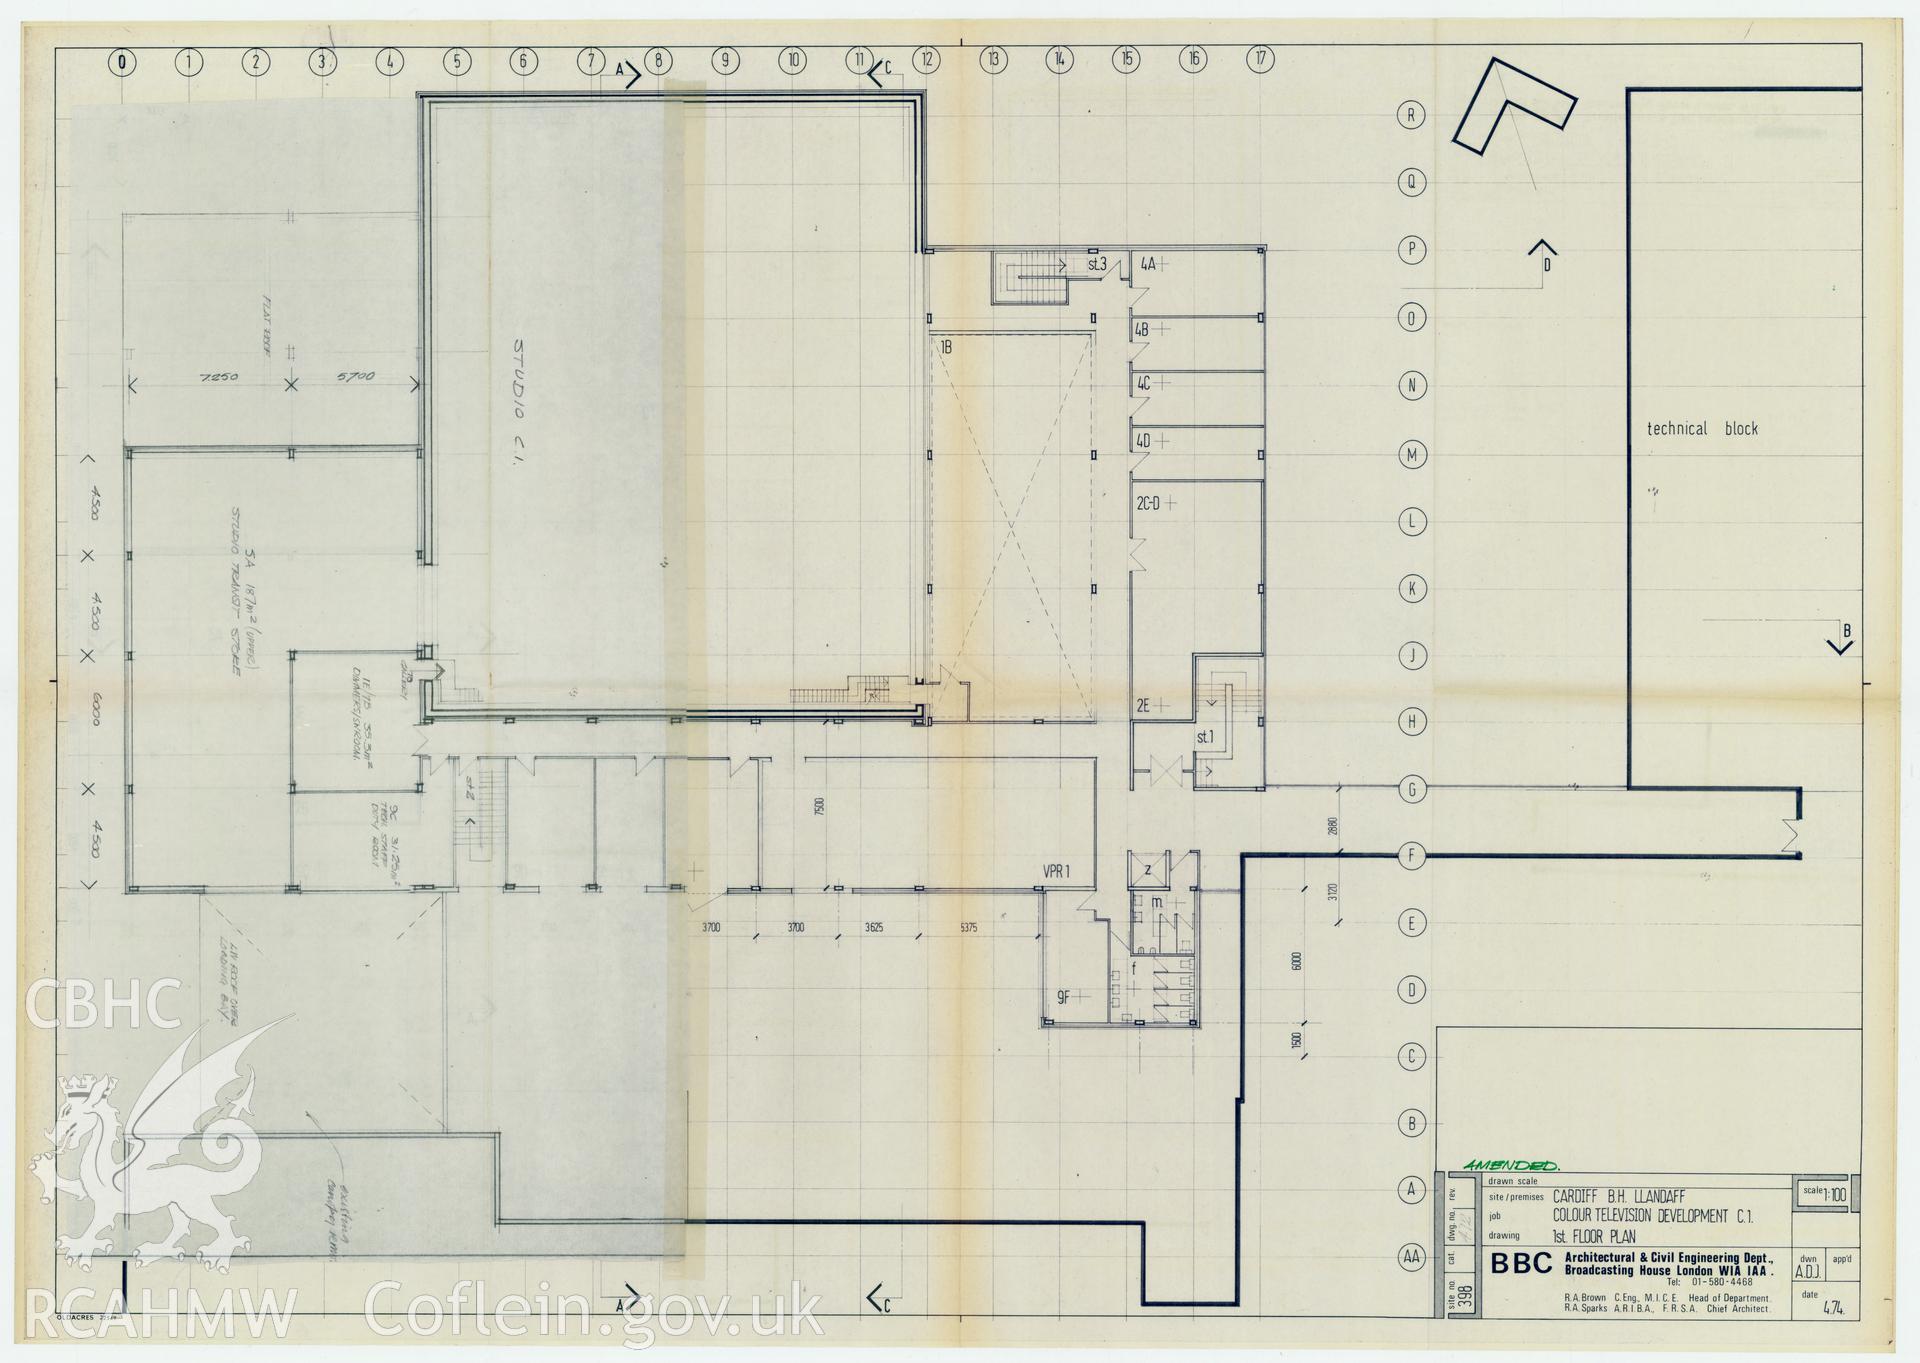 Digitised drawing plan of Llandaff production studio C1 Colour TV Development - First floor plan. Drawing no. 412d. May 1974.